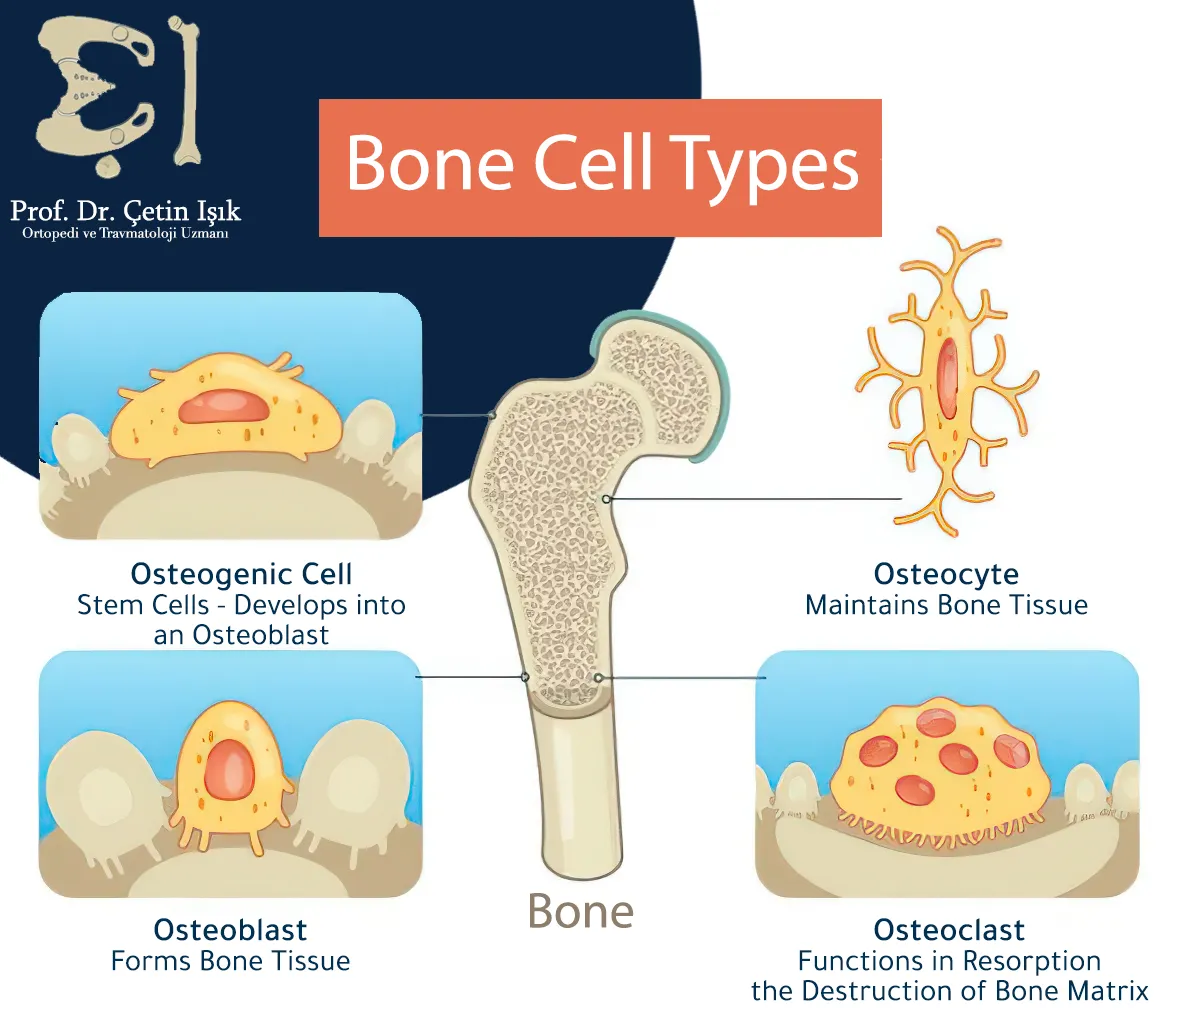 Bones generally consist of osteocytes, osteogenic cells, osteoclasts, osteoblasts, and the matrix that fills the space between the cells.